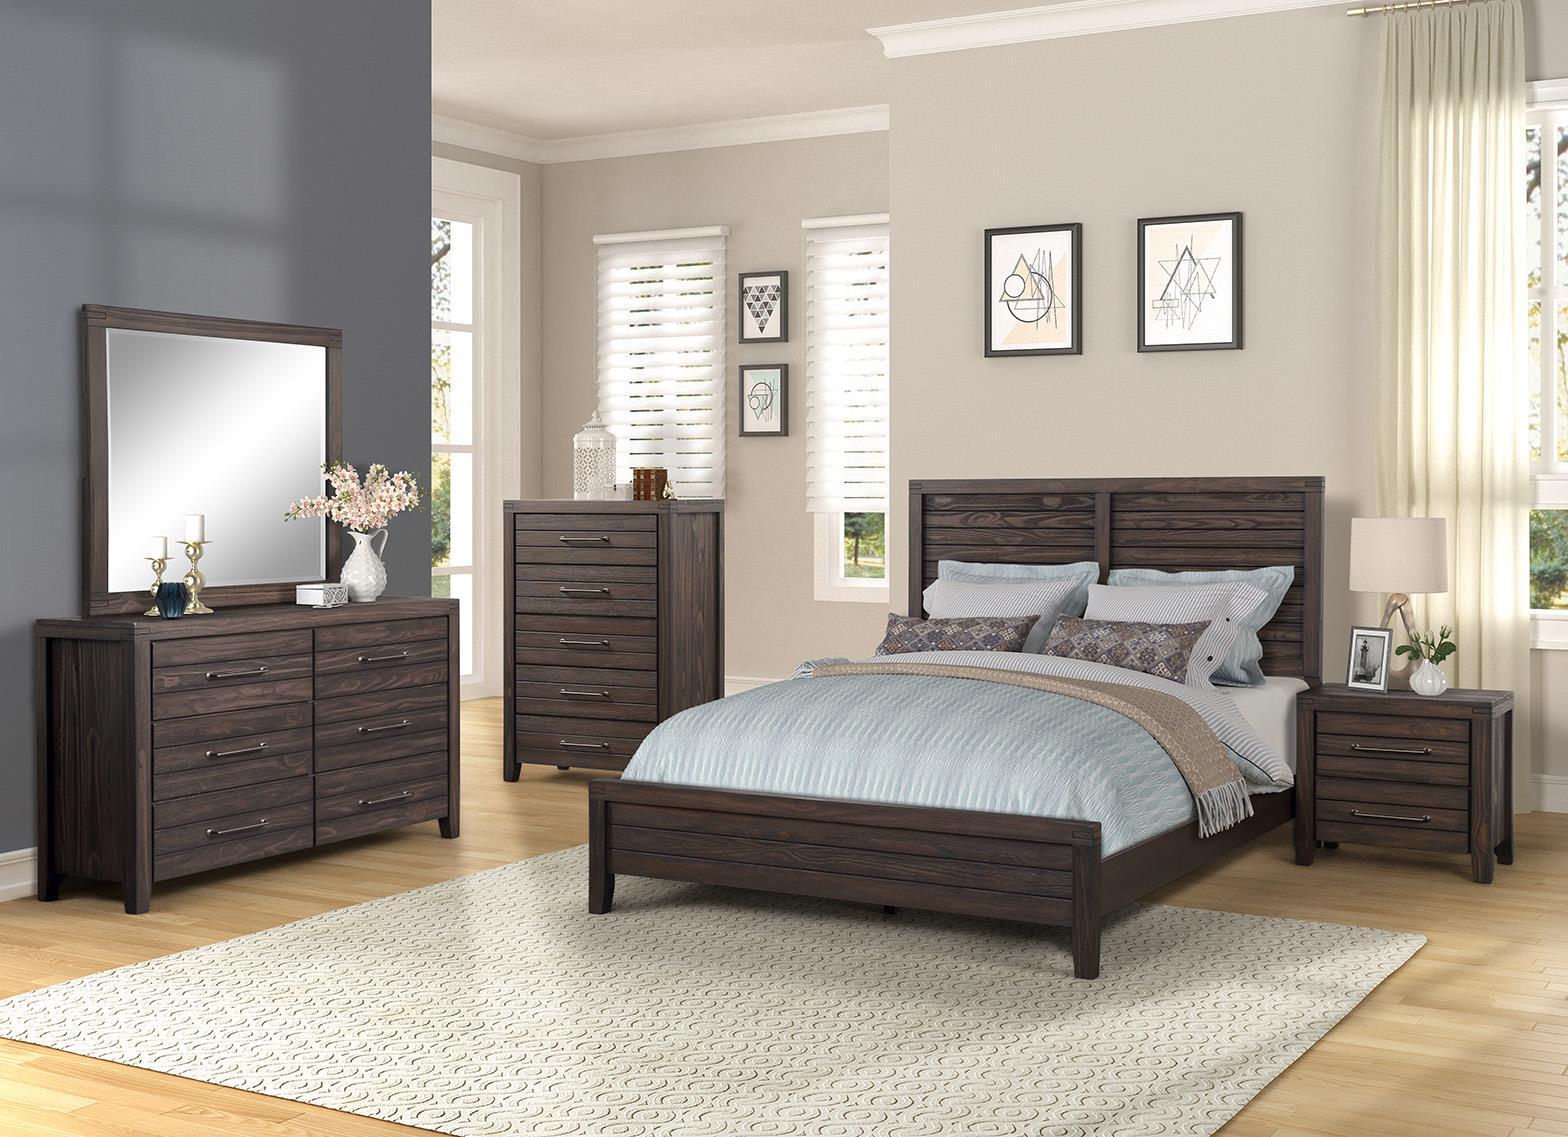 Contemporary, Traditional Panel Bedroom Set CRESTWOOD 1465-110-Set 1465-110-2N-3PC in Auburn, Brown 